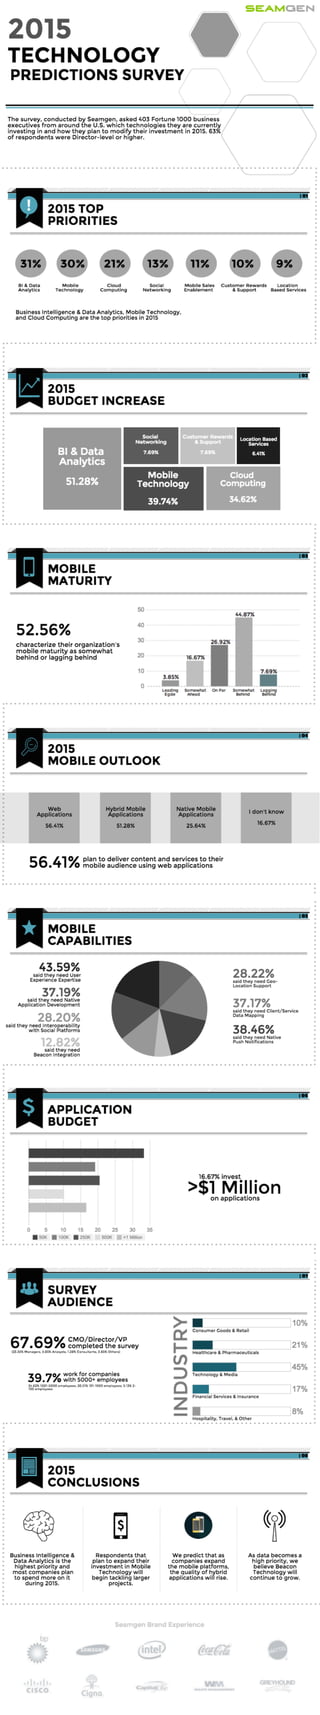 Seamgen infographic-technology-predictions